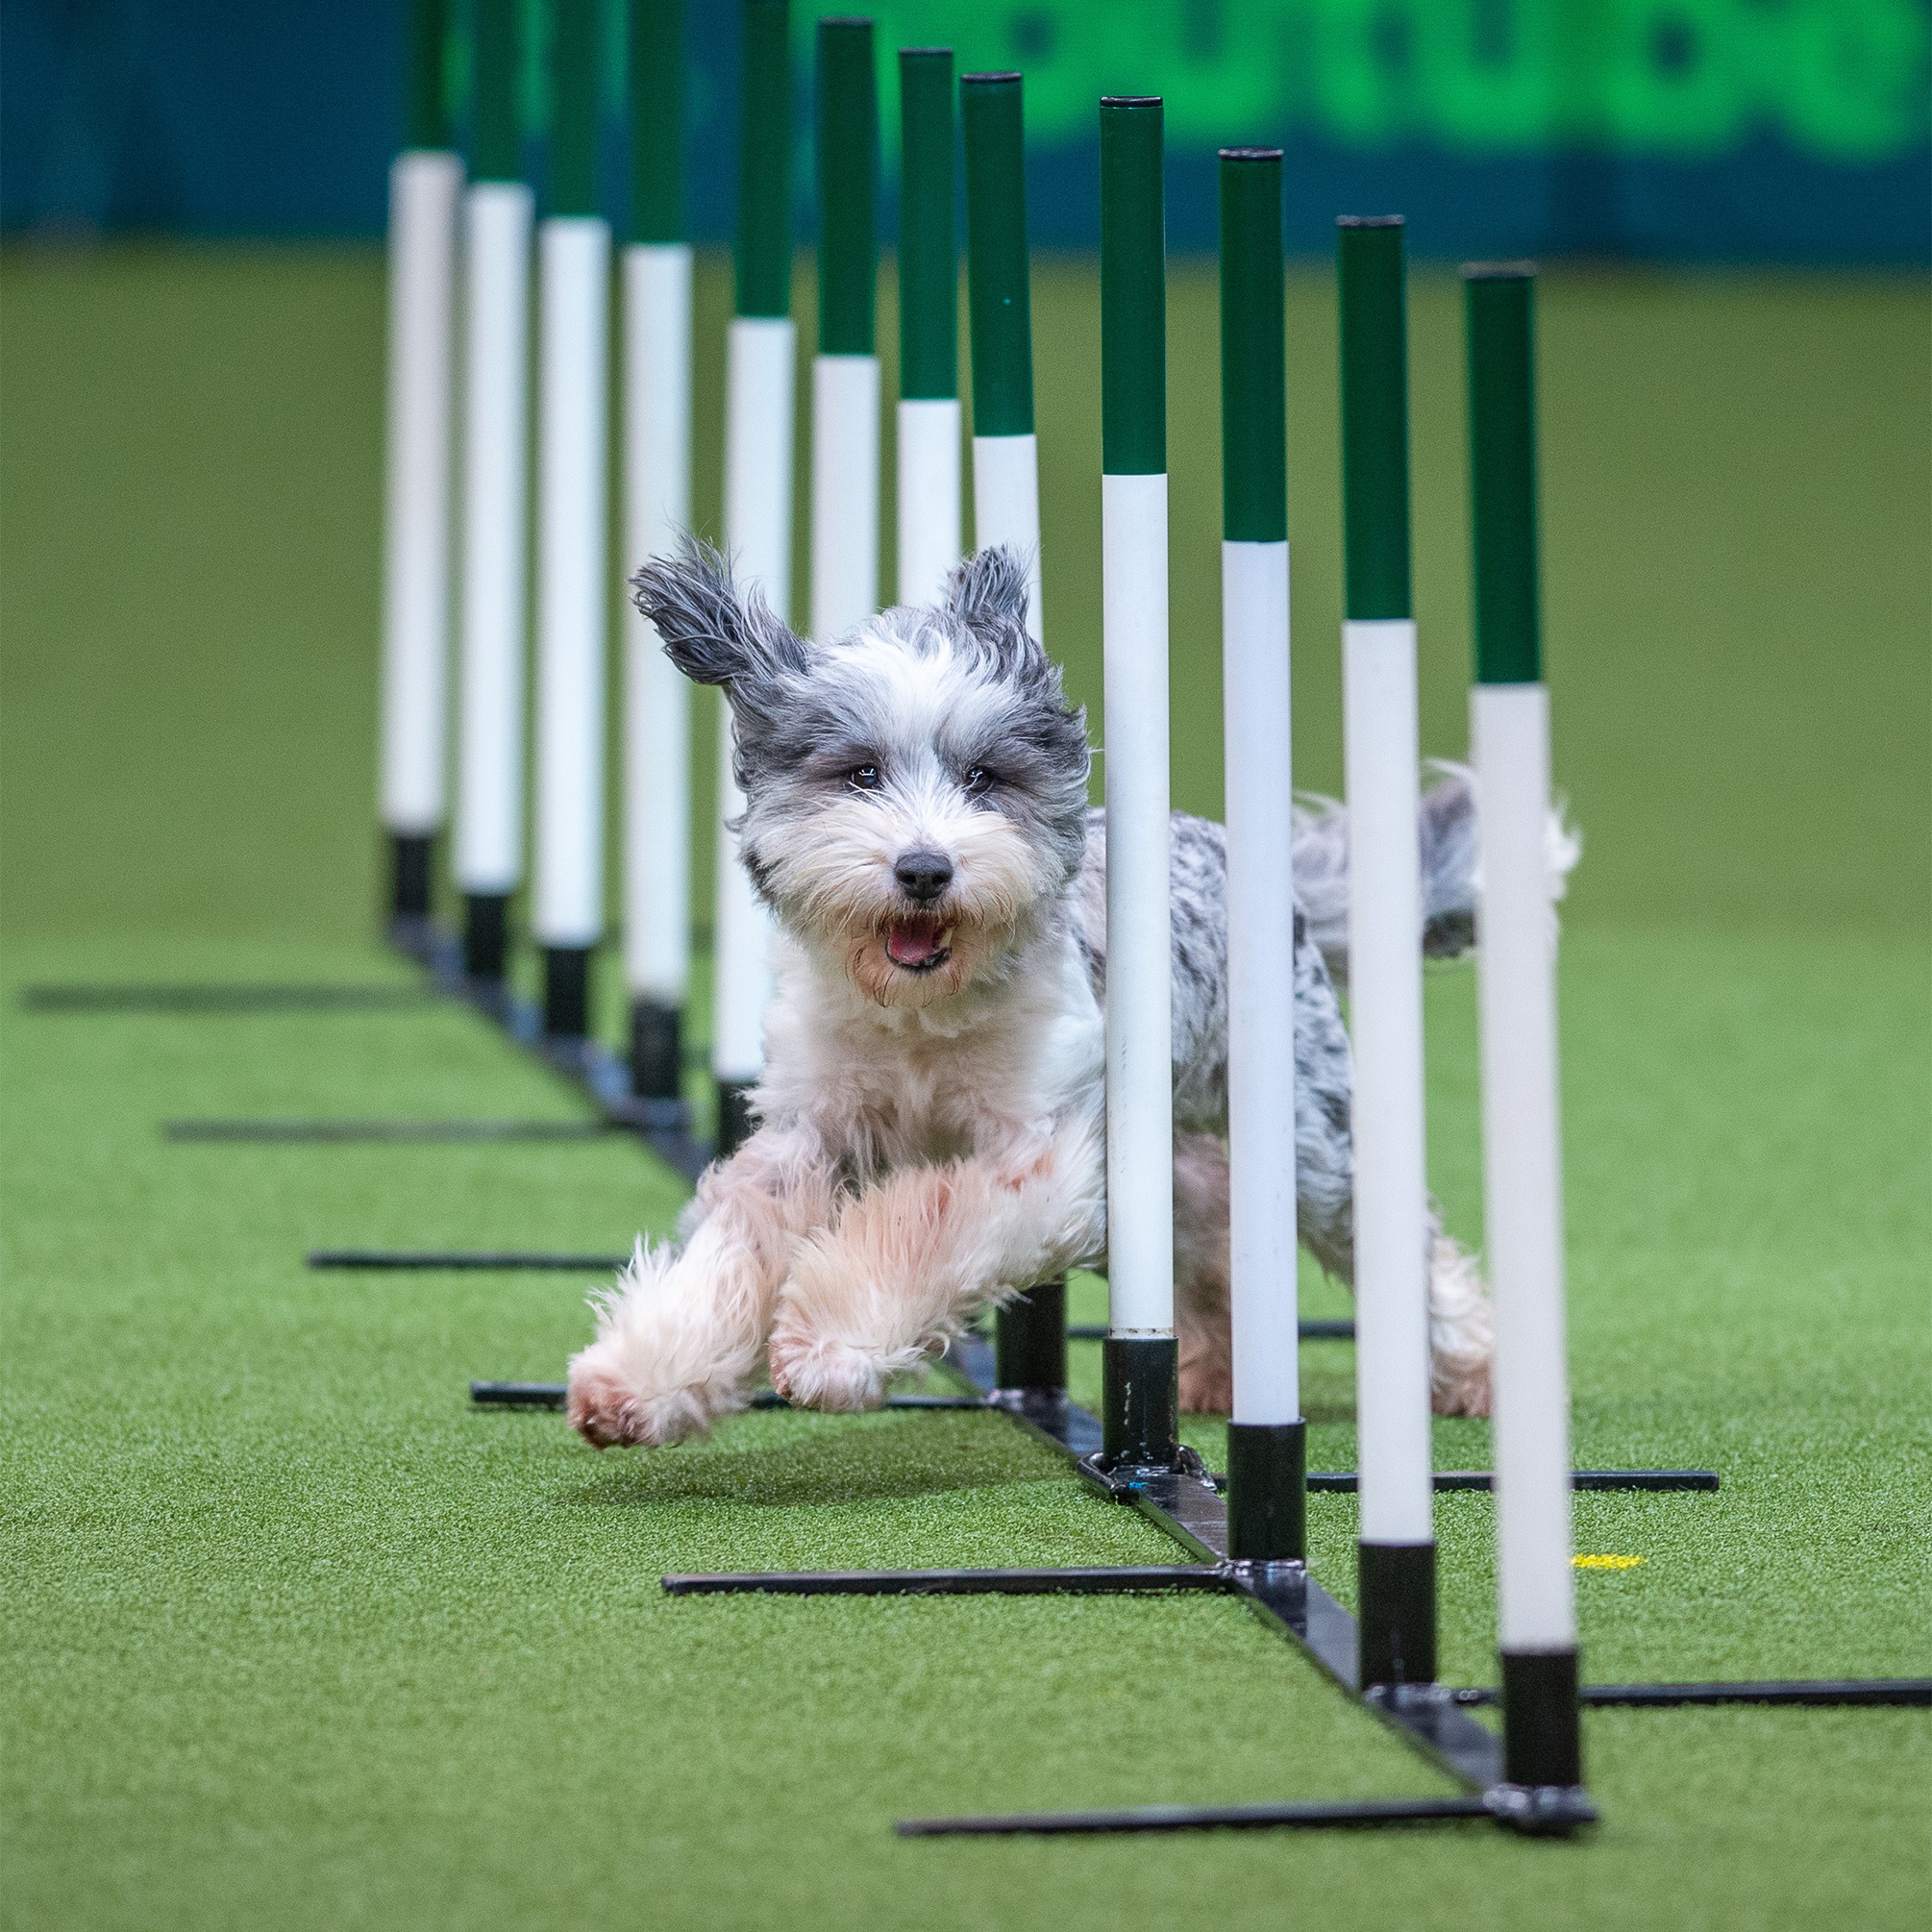 Dog Sports: Crufts: The World's Greatest Dog Show, Kennel Club, Pets Competition. 2010x2010 HD Wallpaper.